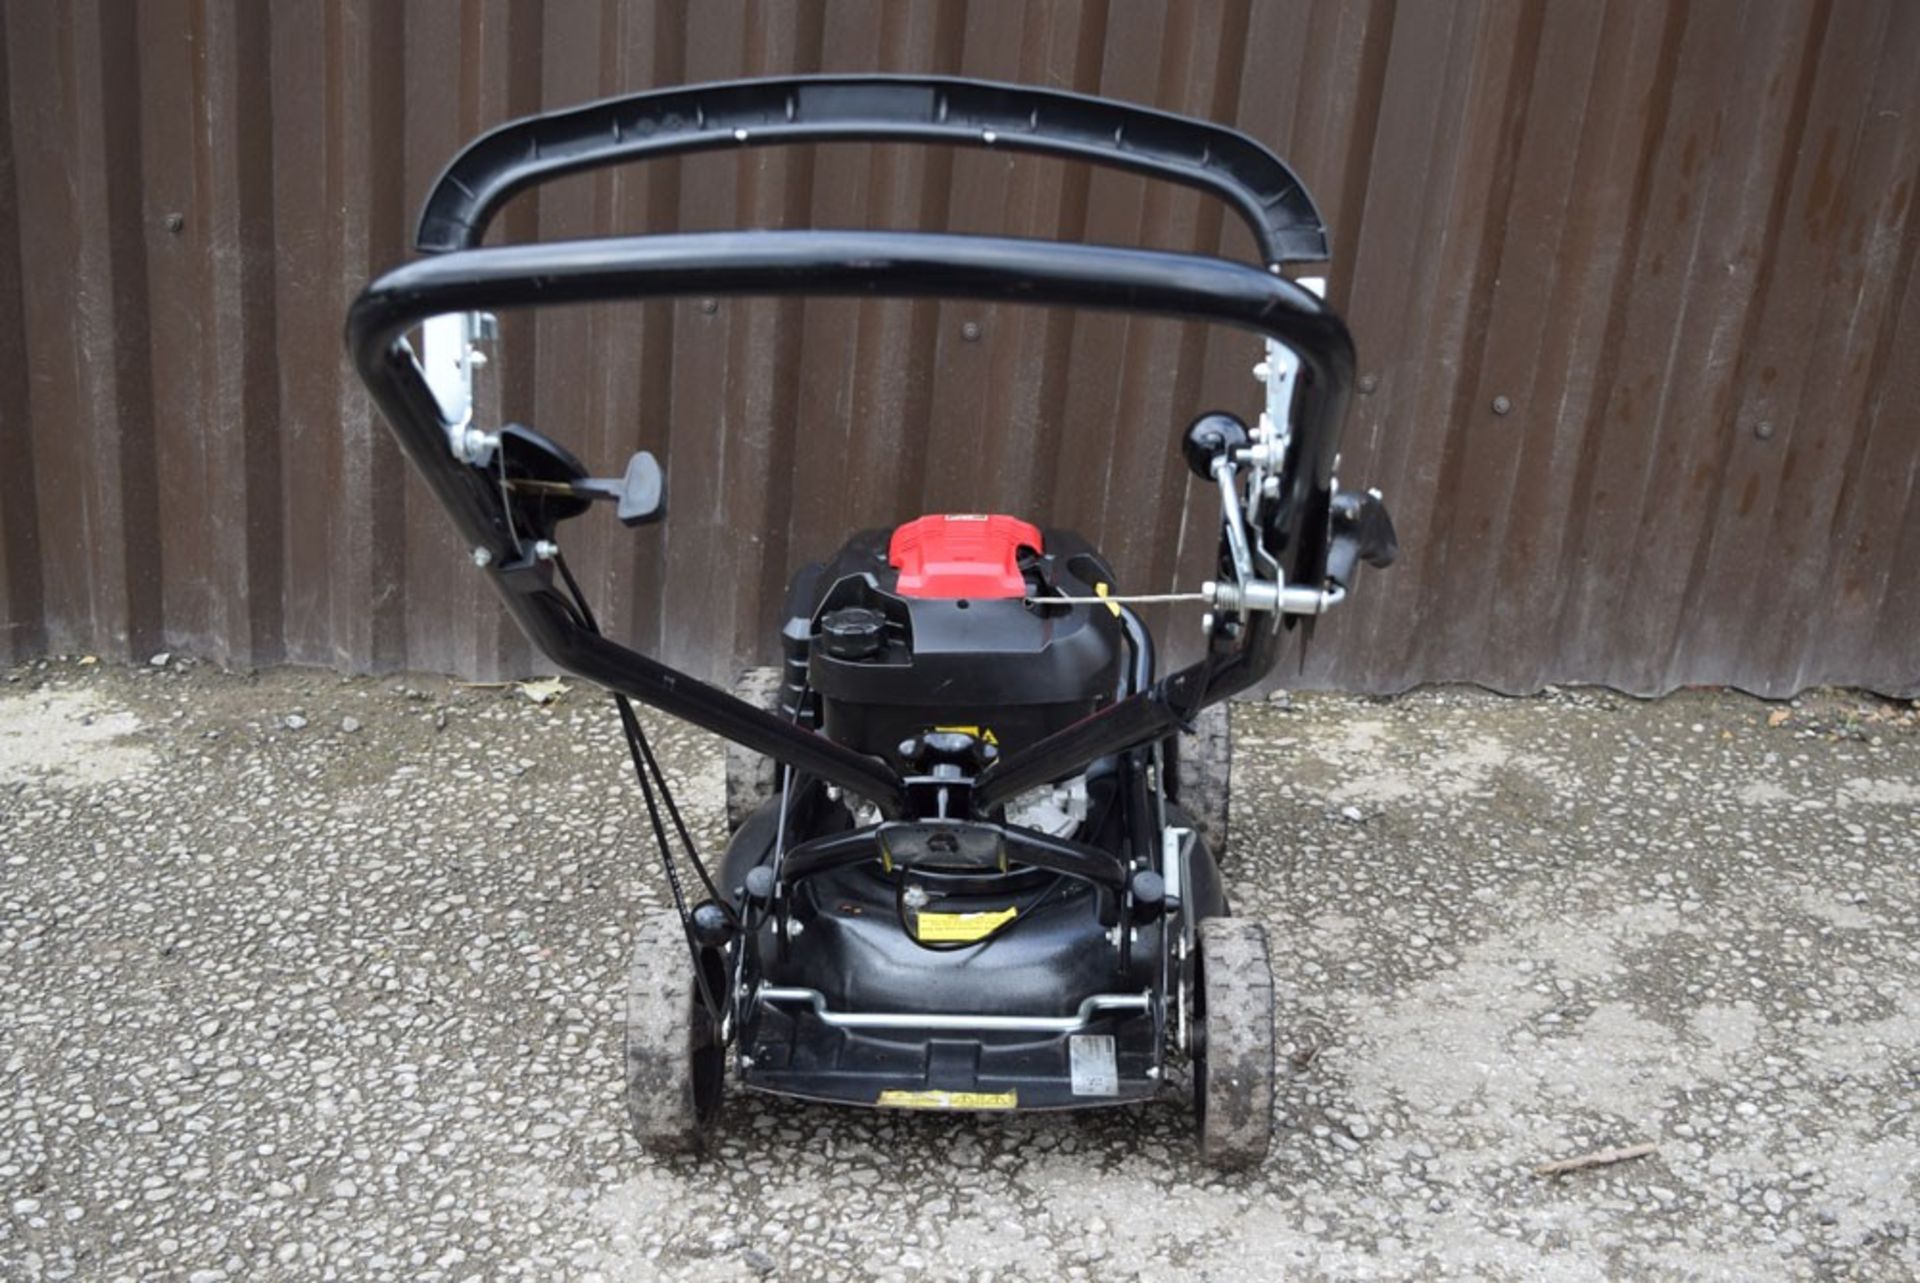 2009 Mountfield Multiclip 501 SP 48cm Self-Propelled Rotary Mower - Image 7 of 7